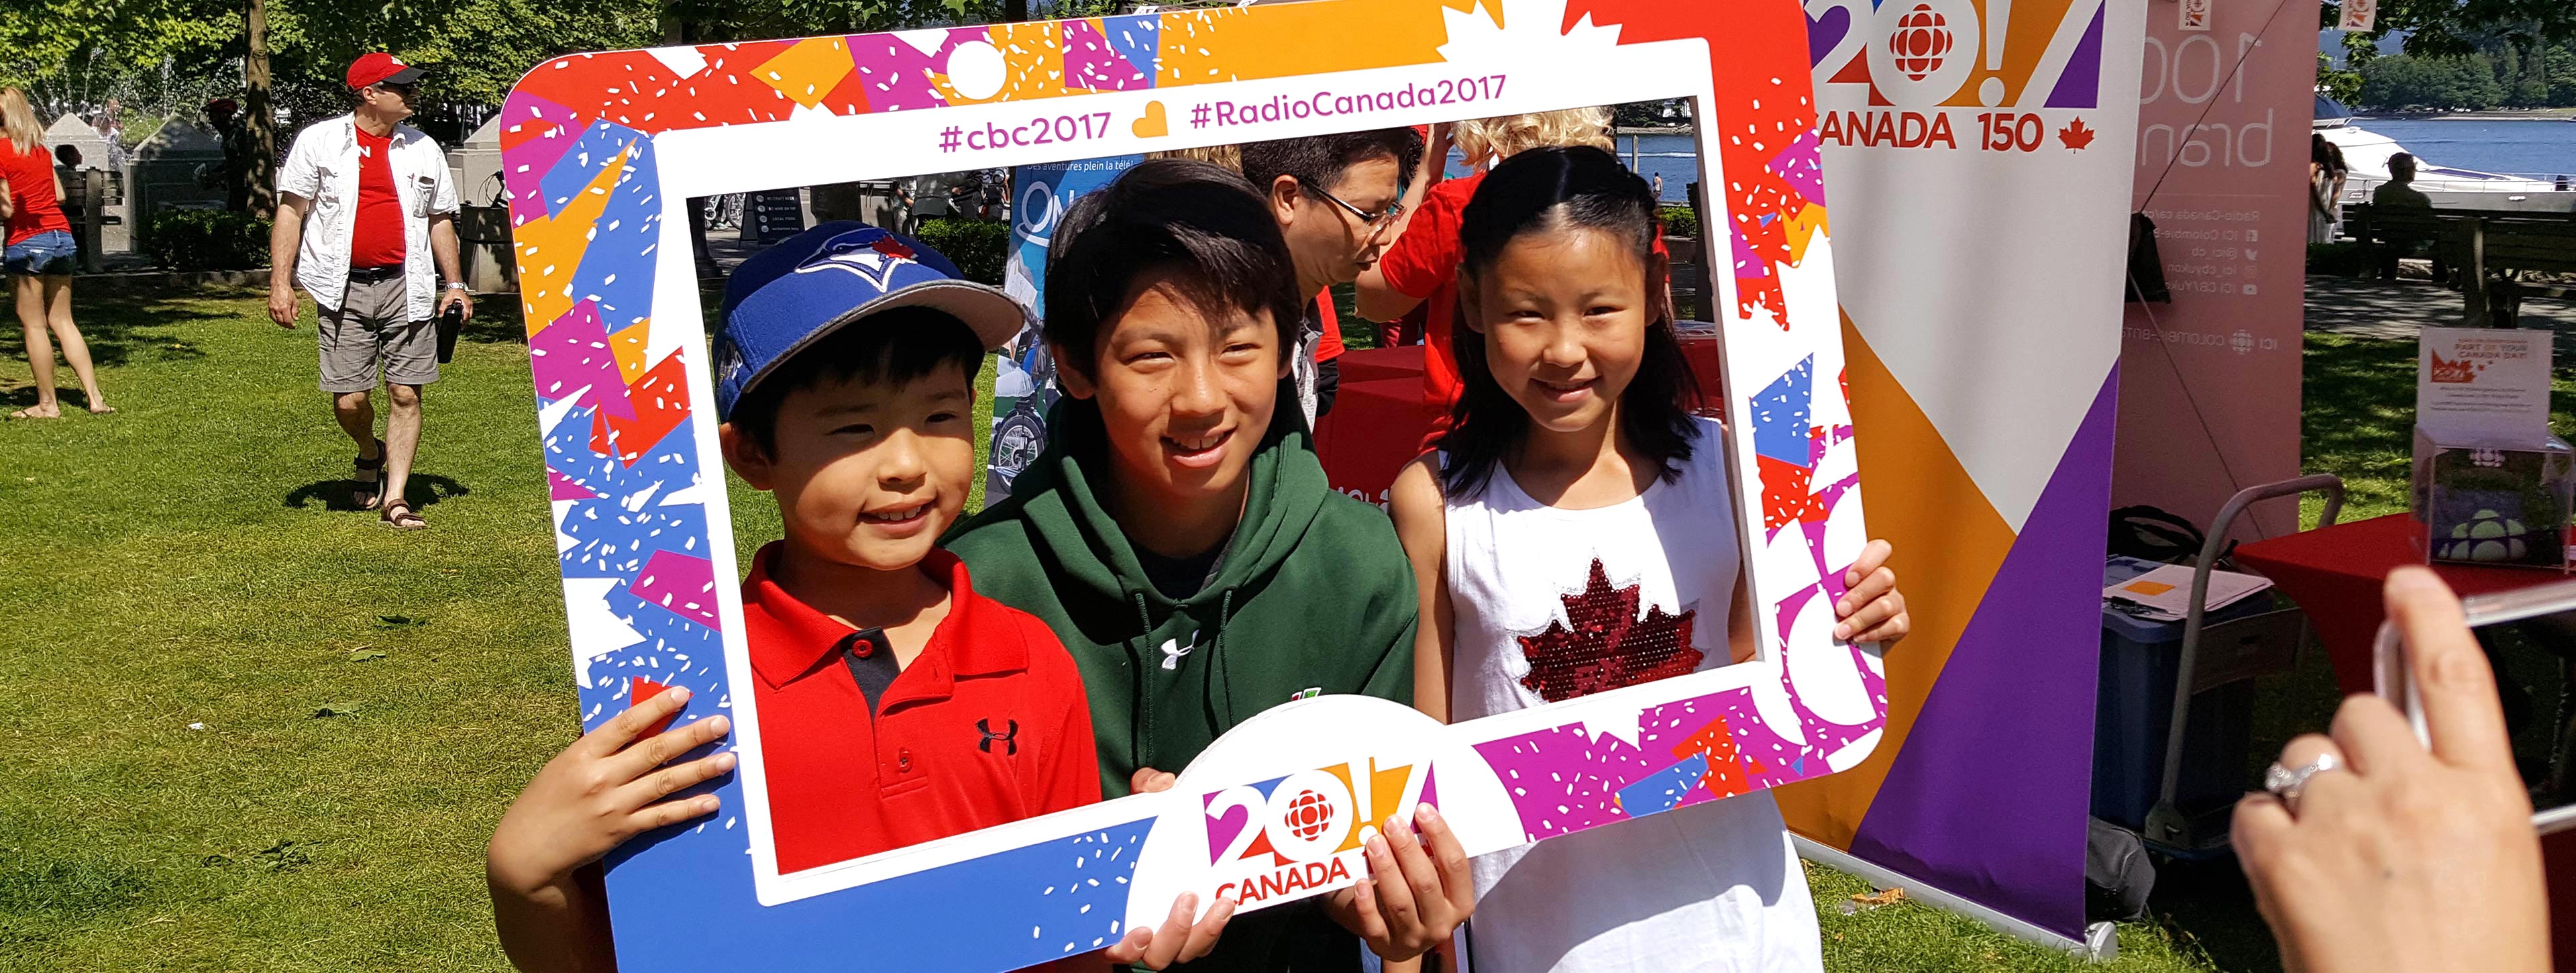 Children pictured holding a Canada 150 frame.